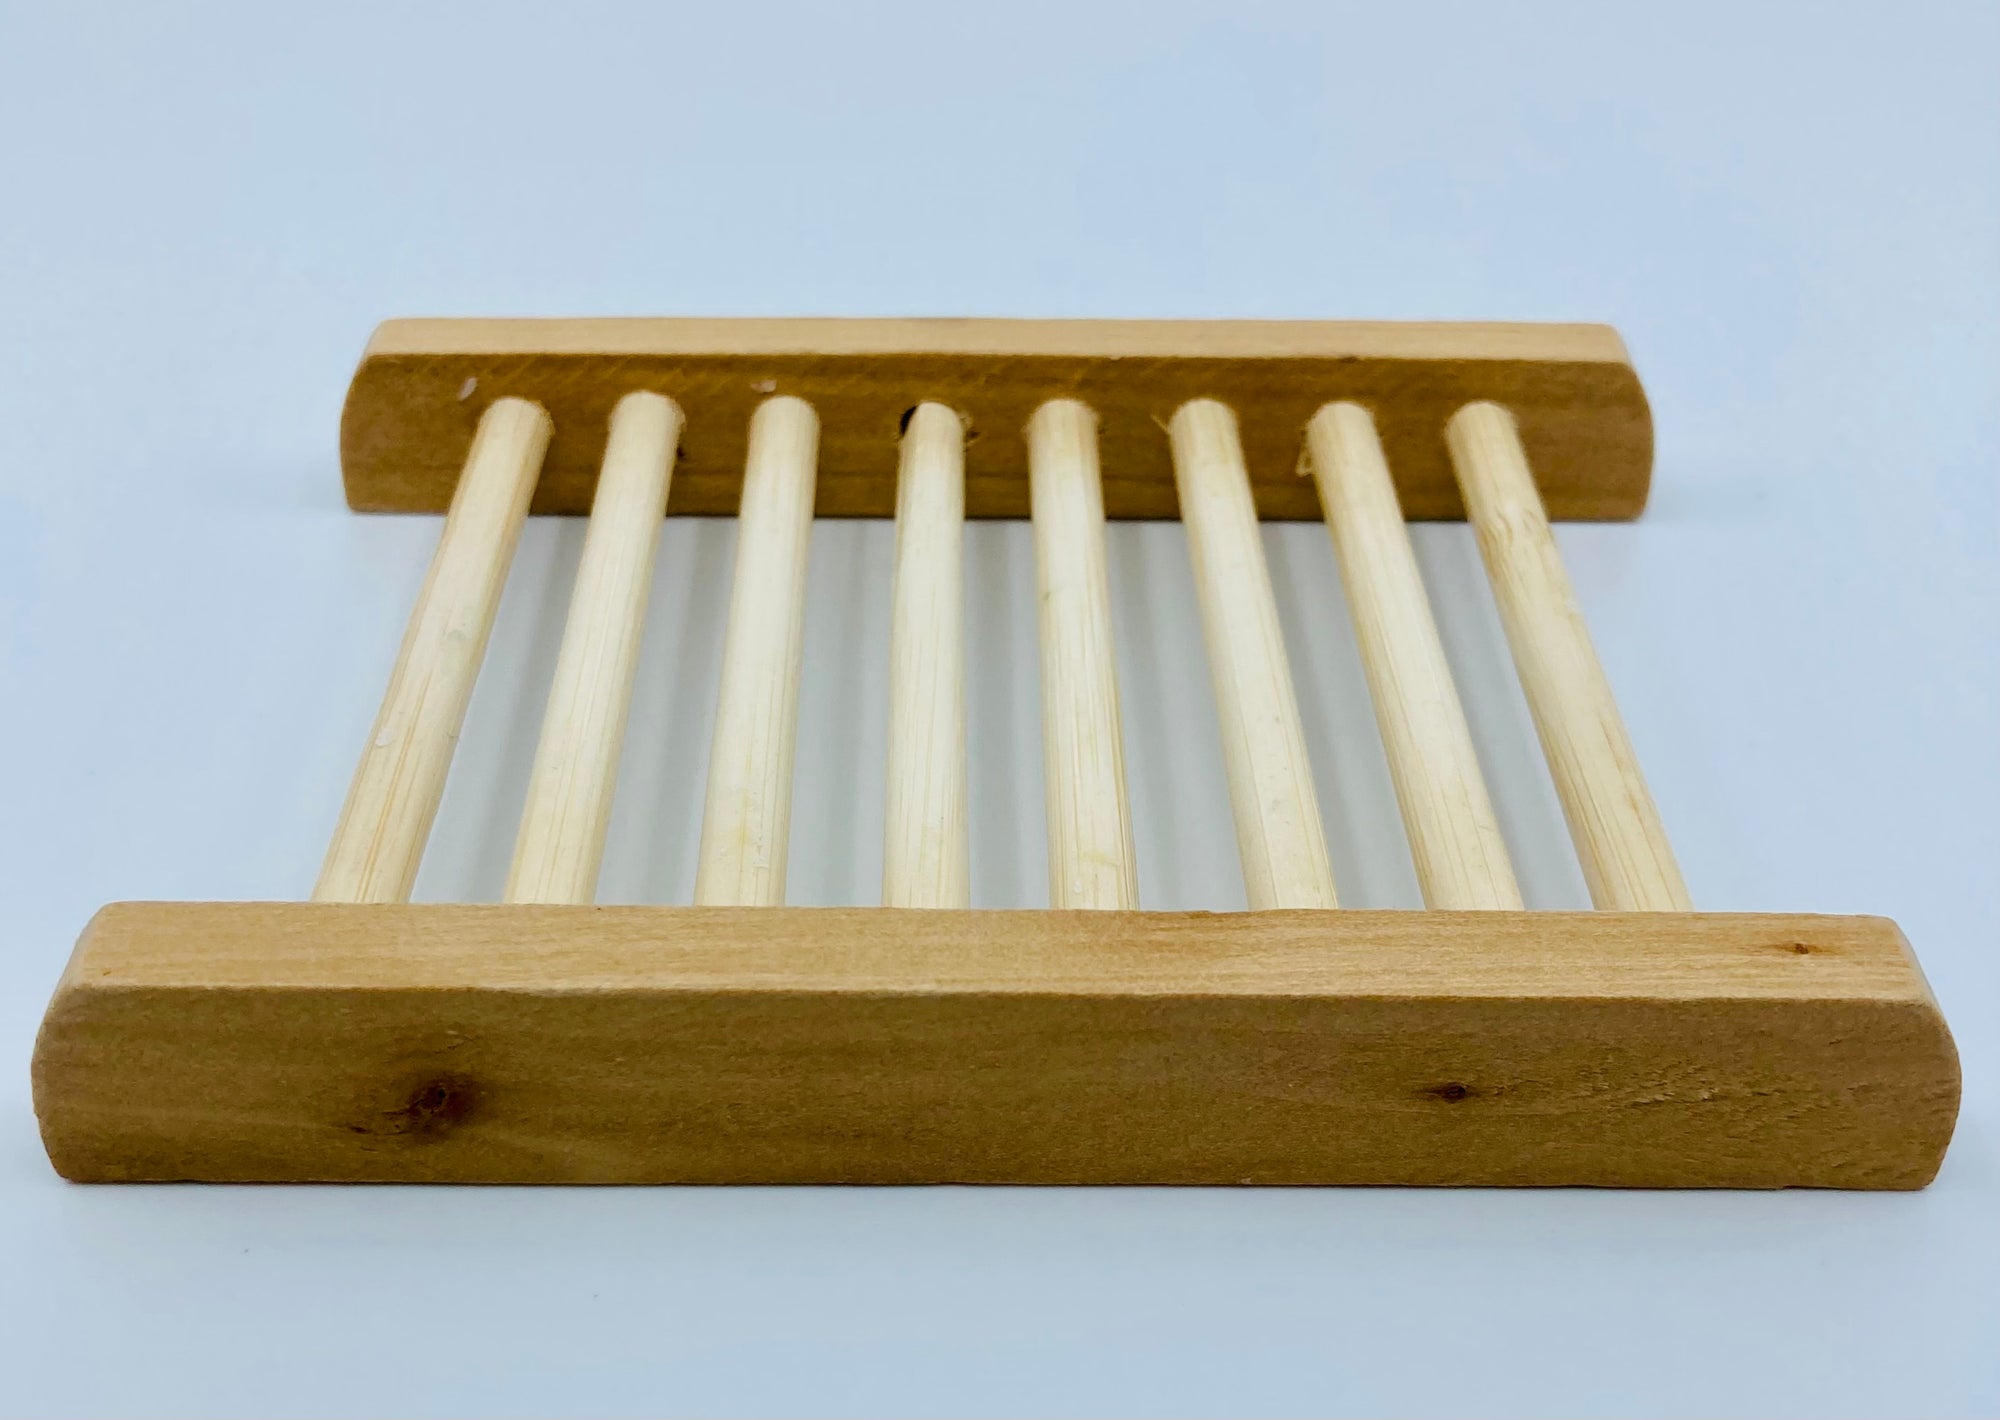 A side view of the bamboo soap dish.